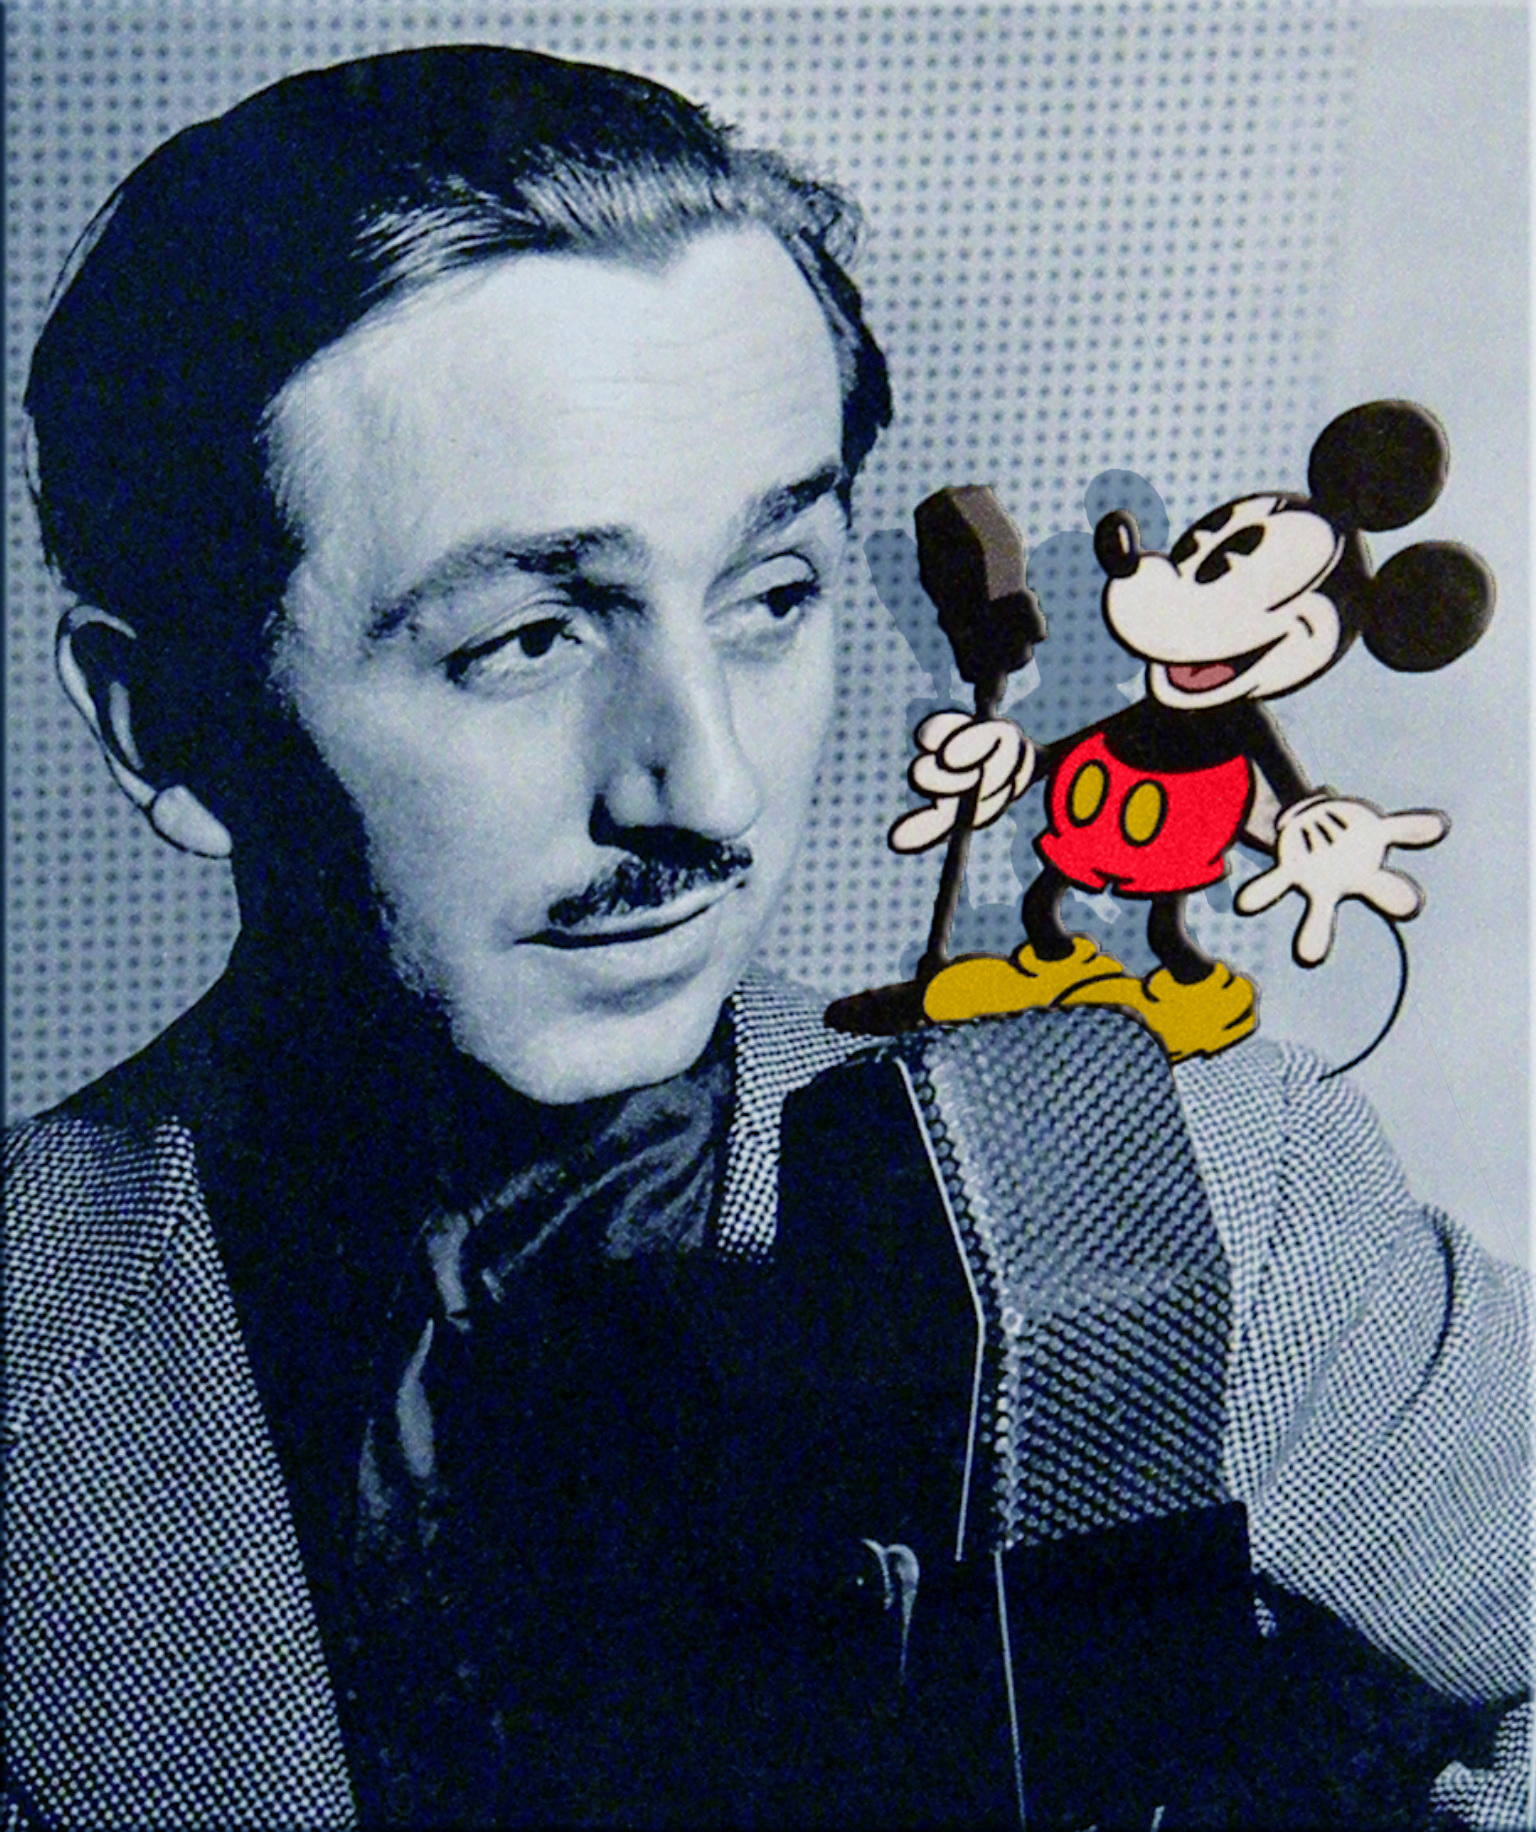 Mr. Walt Disney and Mickey Mouse animated cartoon character